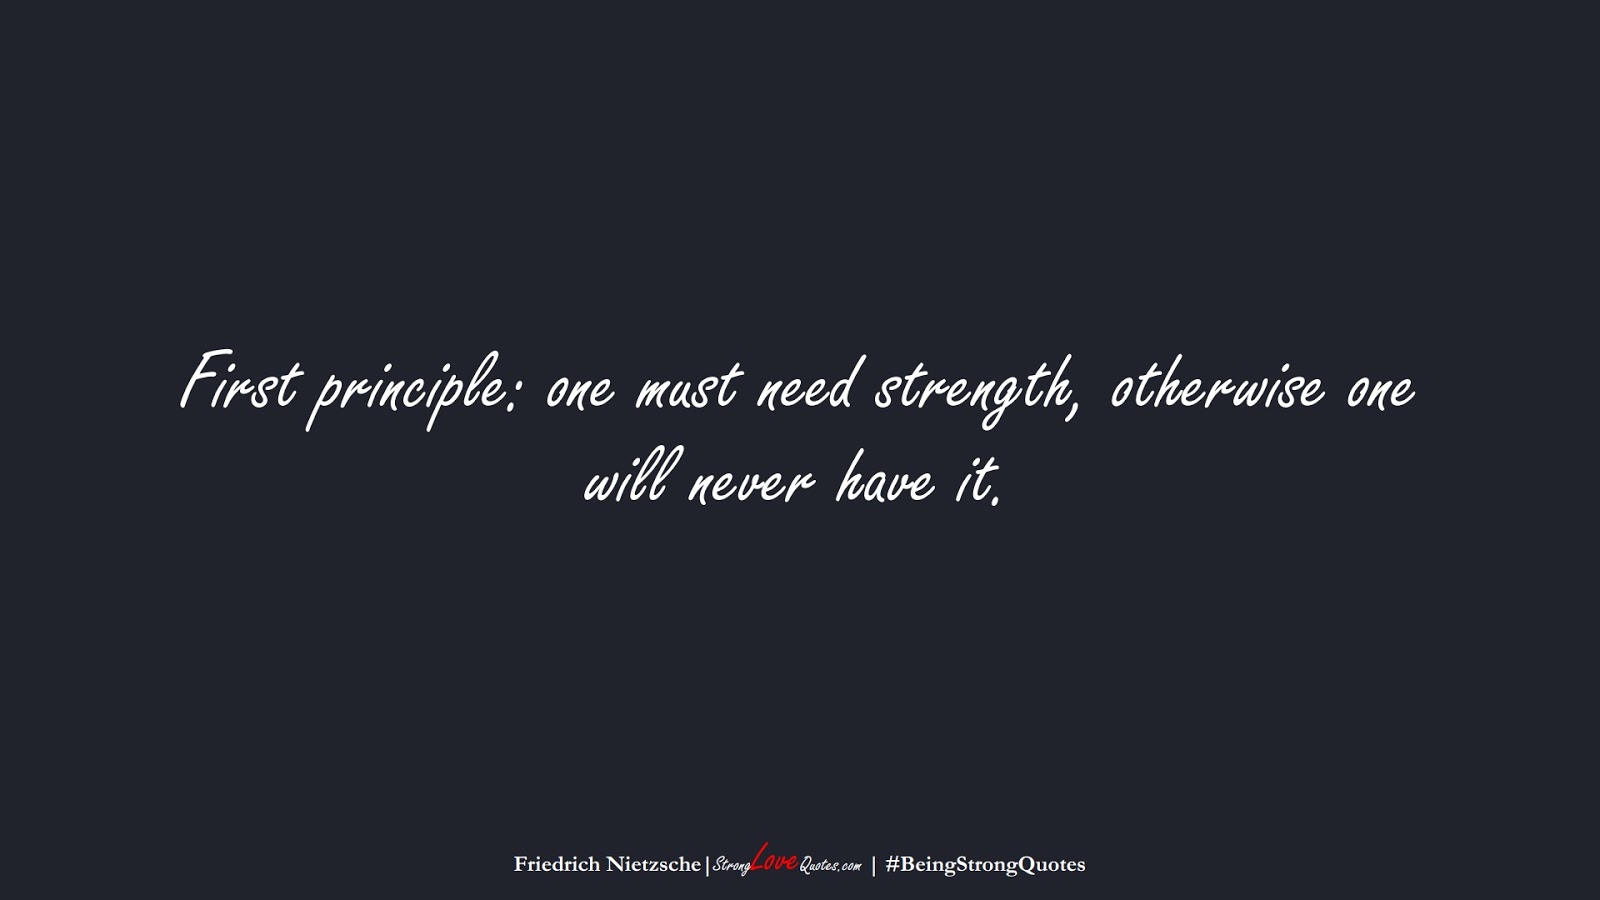 First principle: one must need strength, otherwise one will never have it. (Friedrich Nietzsche);  #BeingStrongQuotes